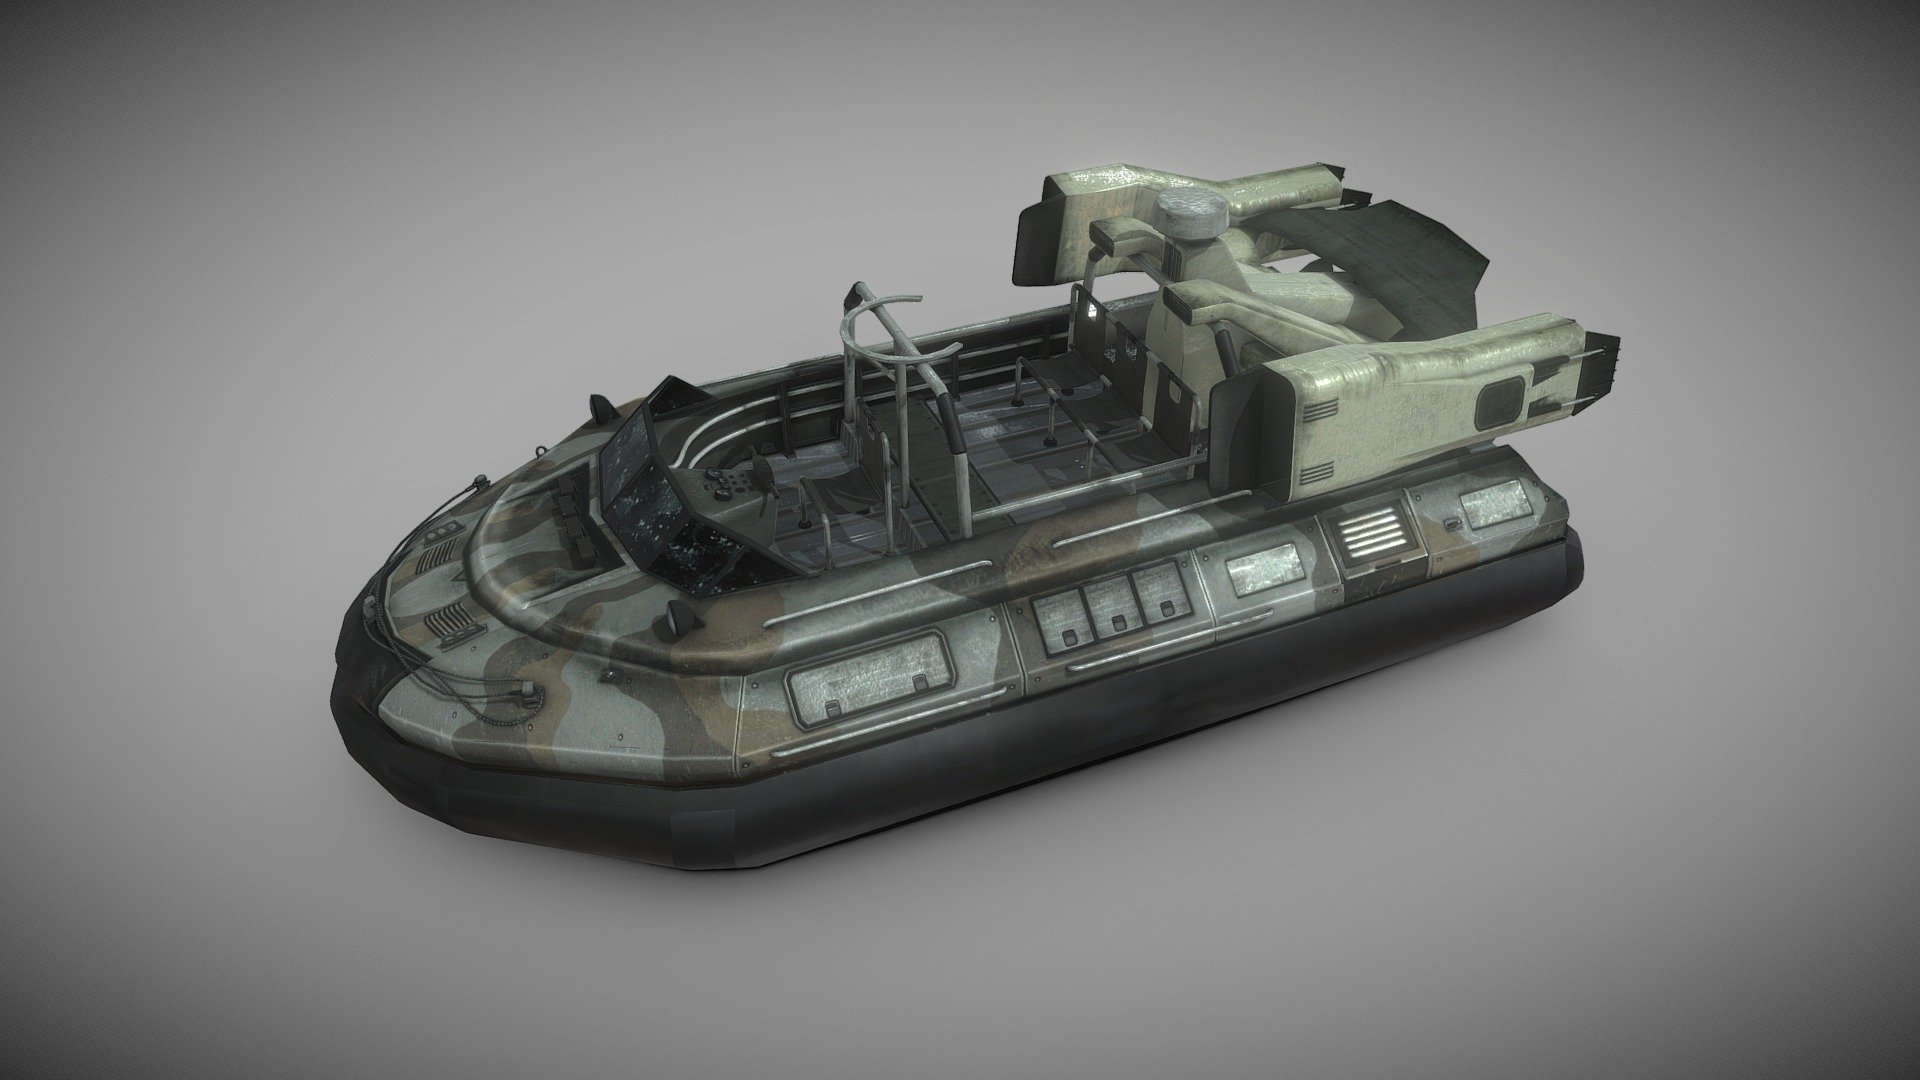 Are you ready to hover off the ground and into the sky? Let this futuristic vehicle take your game to new heights with its realistic 3D design, high resolution textures, and ready-to-use PBR setup.

Now you can bring a hovercraft to your next space adventure game. This model is 4k-baked and fully textured with low poly counts. The model is designed to be low poly and render-friendly 3d model